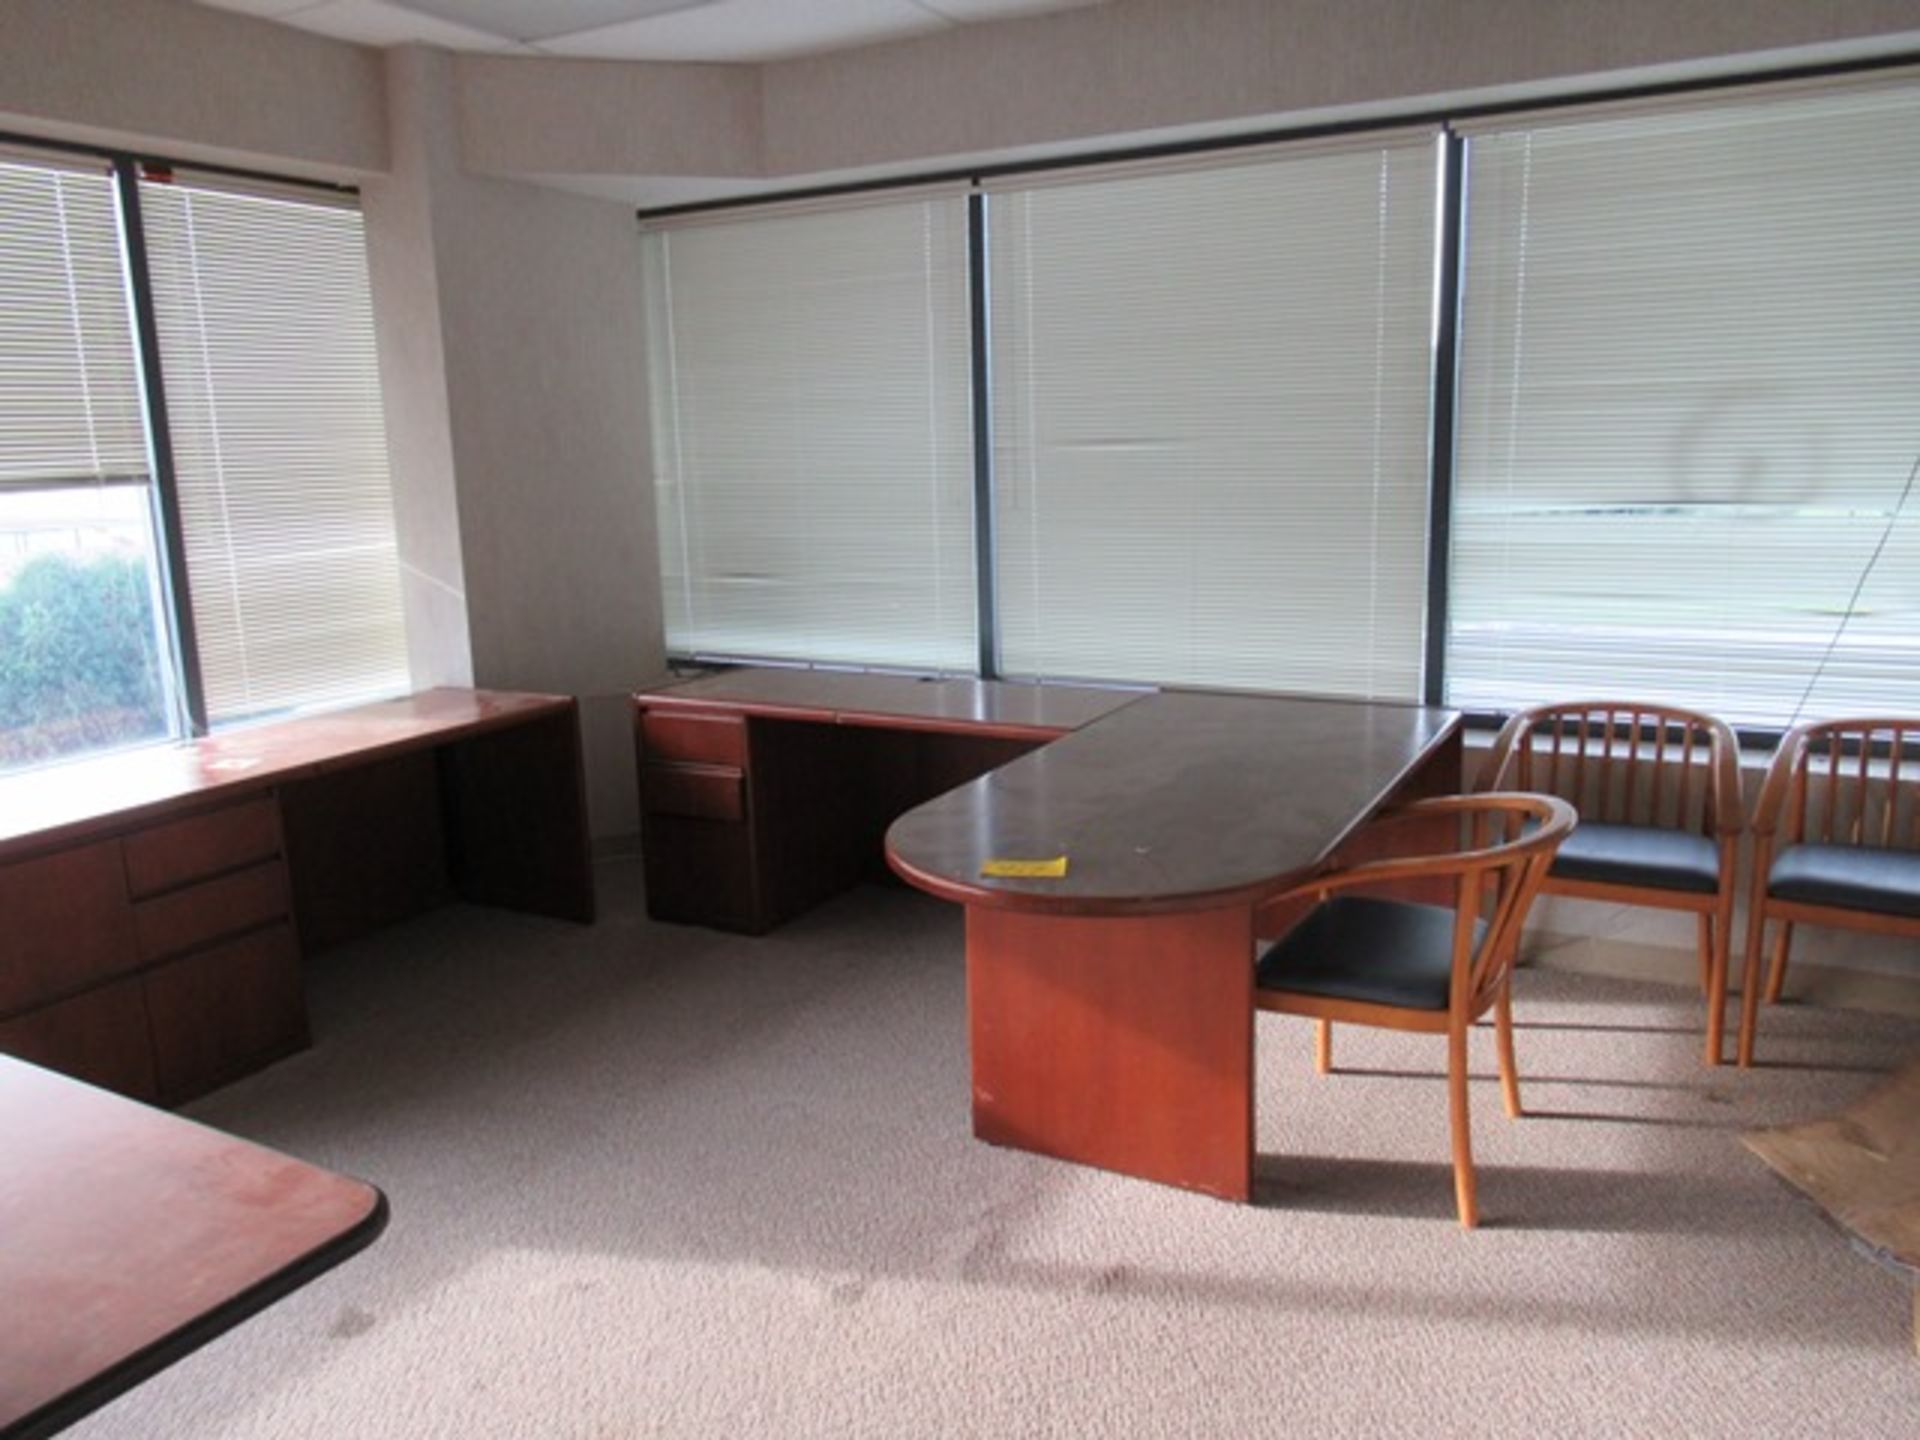 LOT CONTENTS OF 2 OFFICES - DESKS, CHAIR, ETC. (MO2NDF) - Image 2 of 3